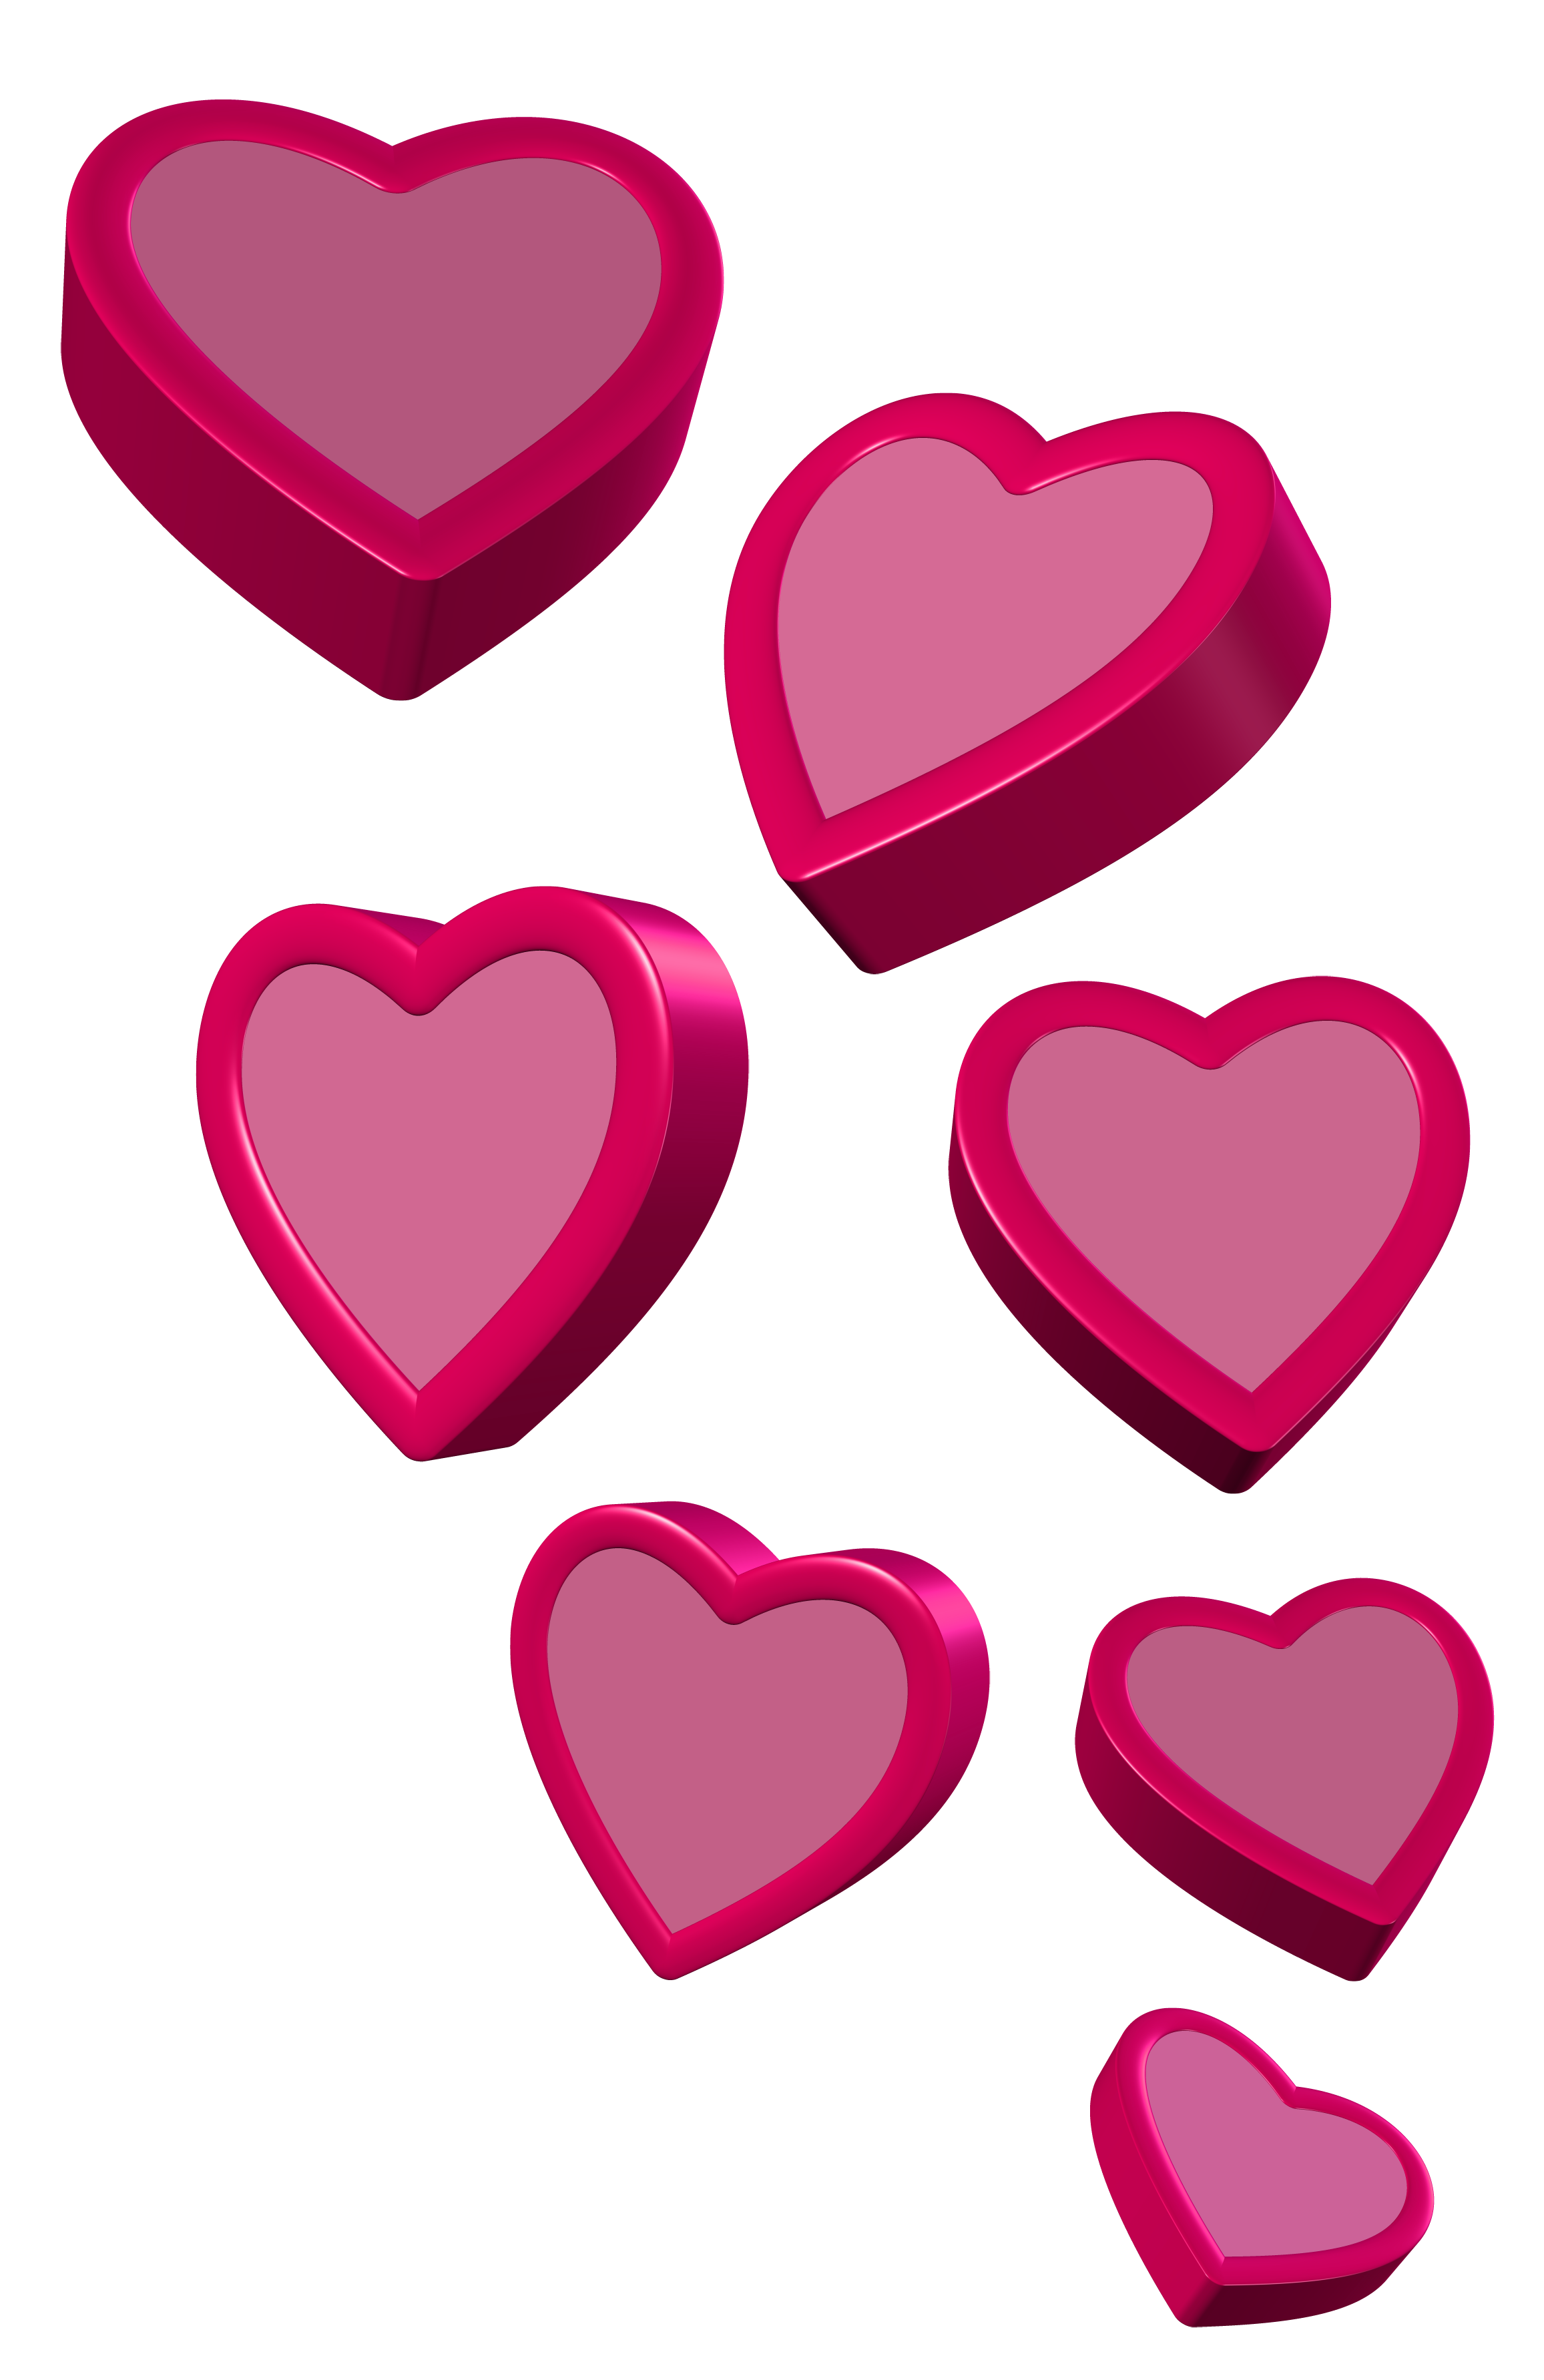 Hearts image from gallery yopriceville var albums free clipart